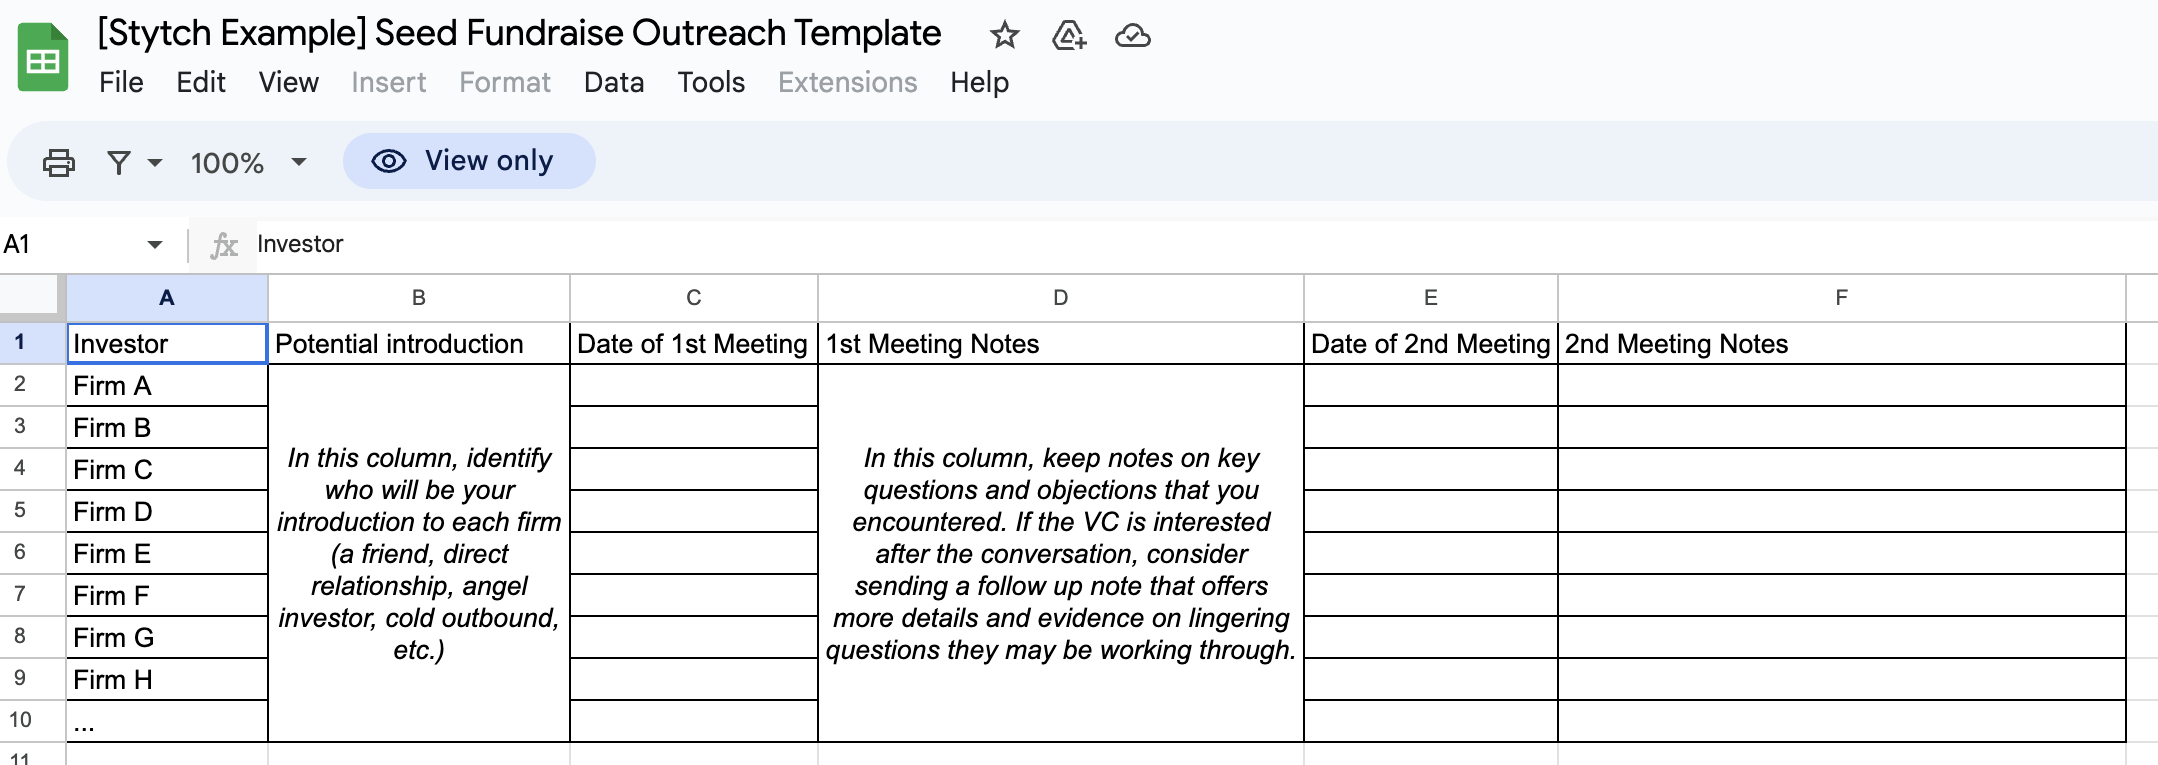 A Google spreadsheet template for investor outreach, including columns for Investor, Potential Introduction, !st meeting date, 1st meeting notes, and 2nd meeting date and notes.